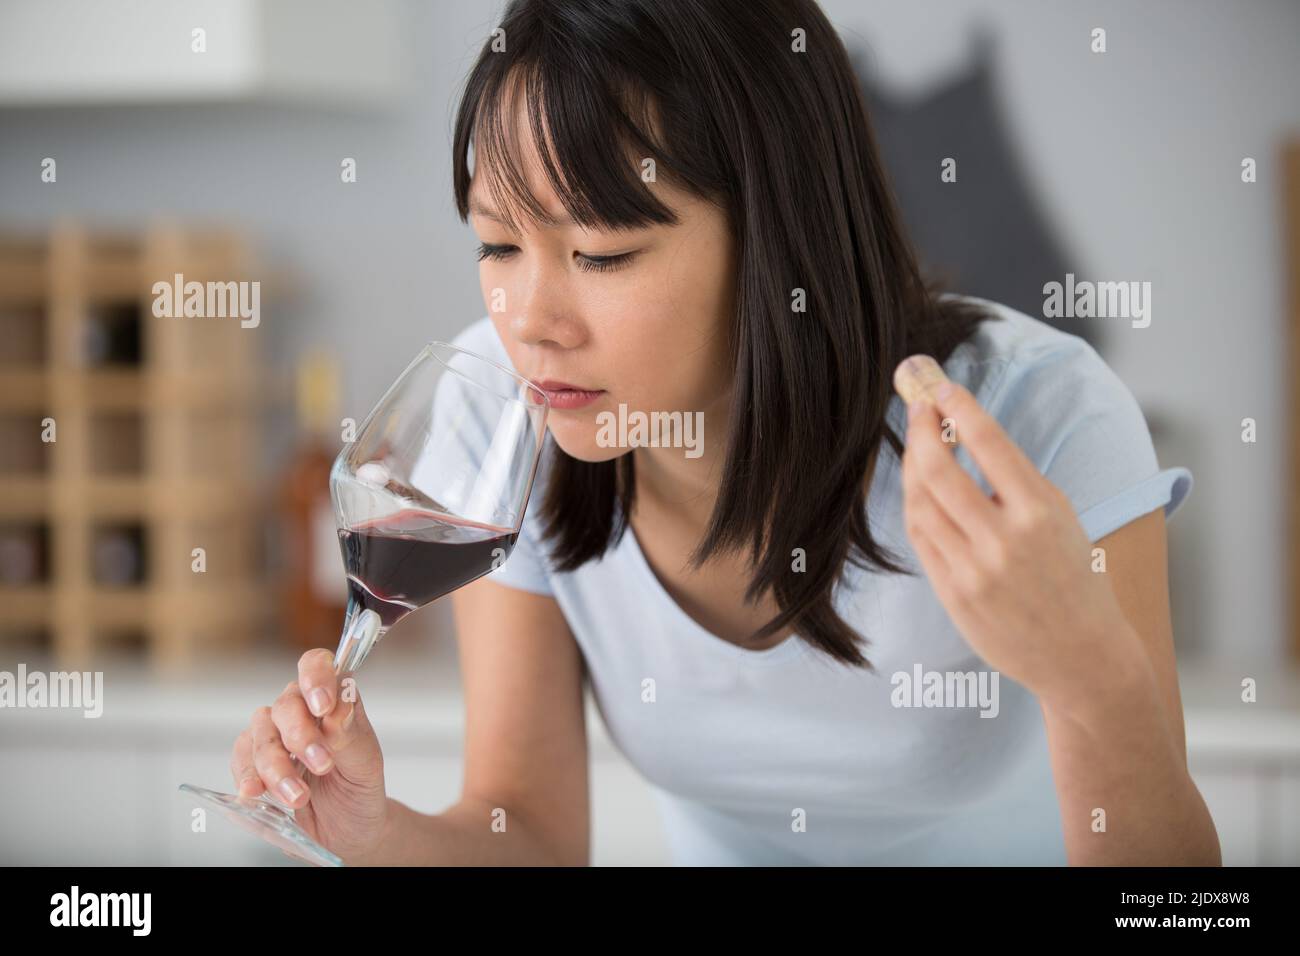 closeup portrait of young female smelling red wine Stock Photo